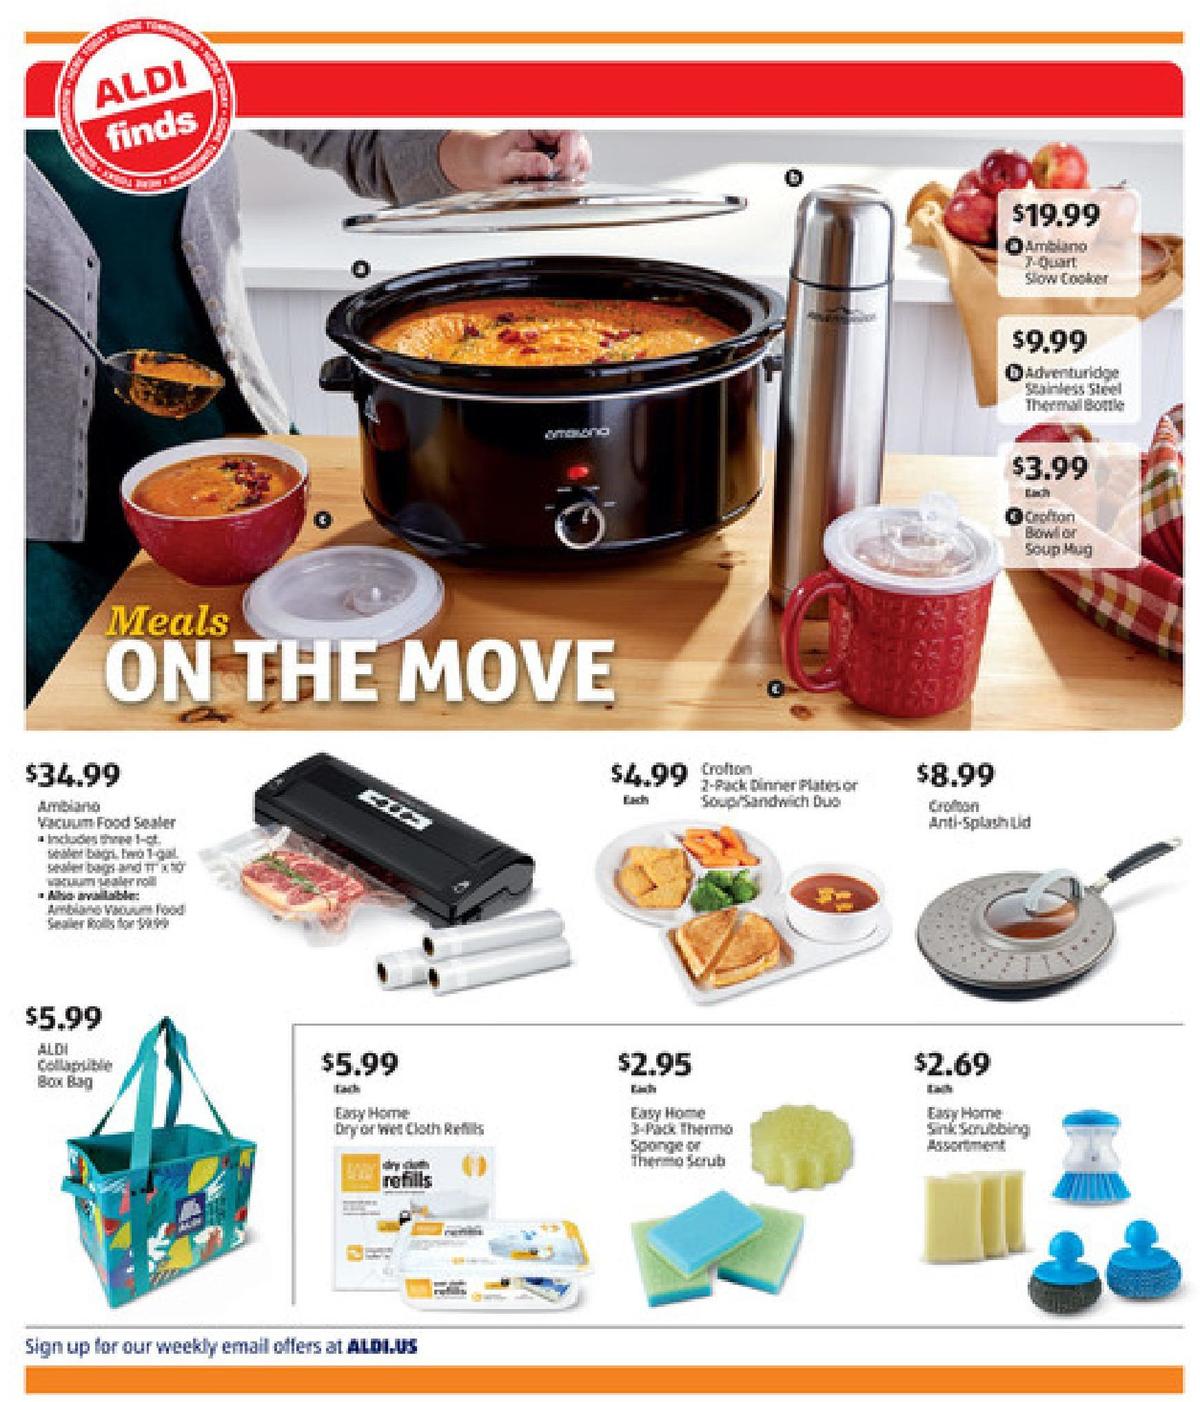 ALDI In Store Ad Weekly Ad from October 27